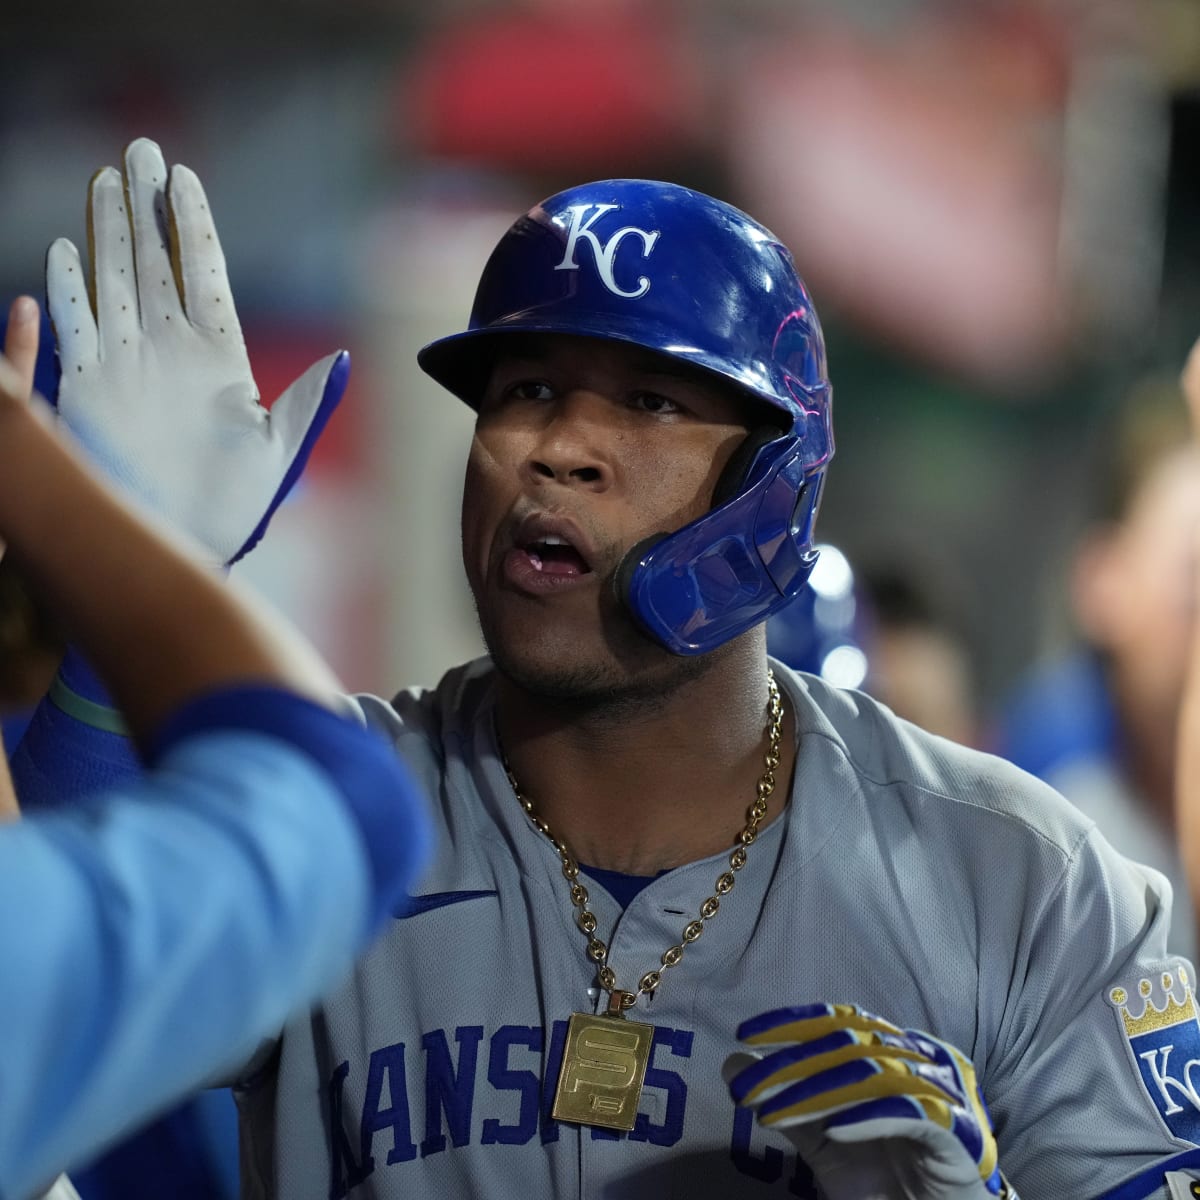 Royals catcher Salvador Perez on DL with intercostal strain